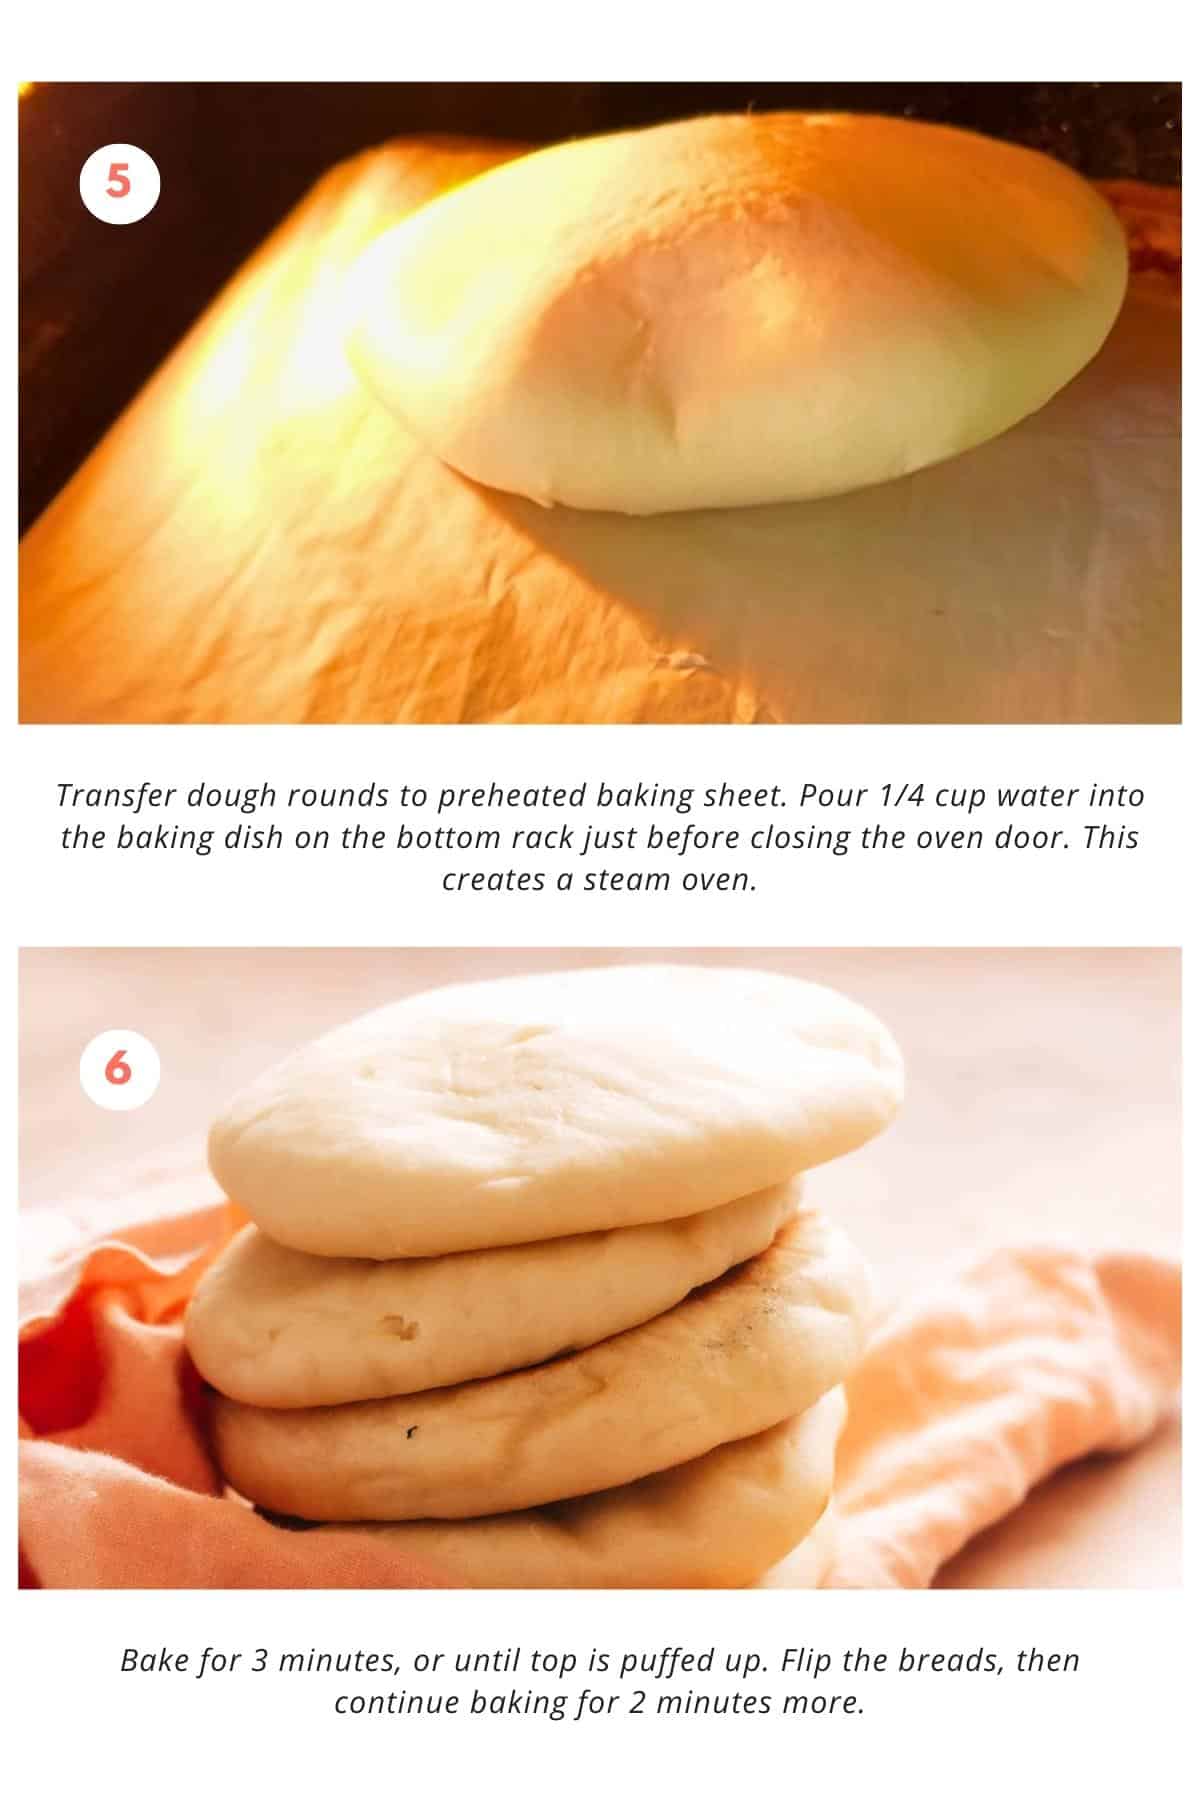 The dough rounds are transferred to the preheated parchment-lined baking sheet when ready to bake. Just before closing the oven door, 1/4 cup of water is poured into the baking dish on the bottom rack to create a steam oven. The bread is baked for 3 minutes until the top is puffed up, then flipped and baked for an additional 2 minutes.